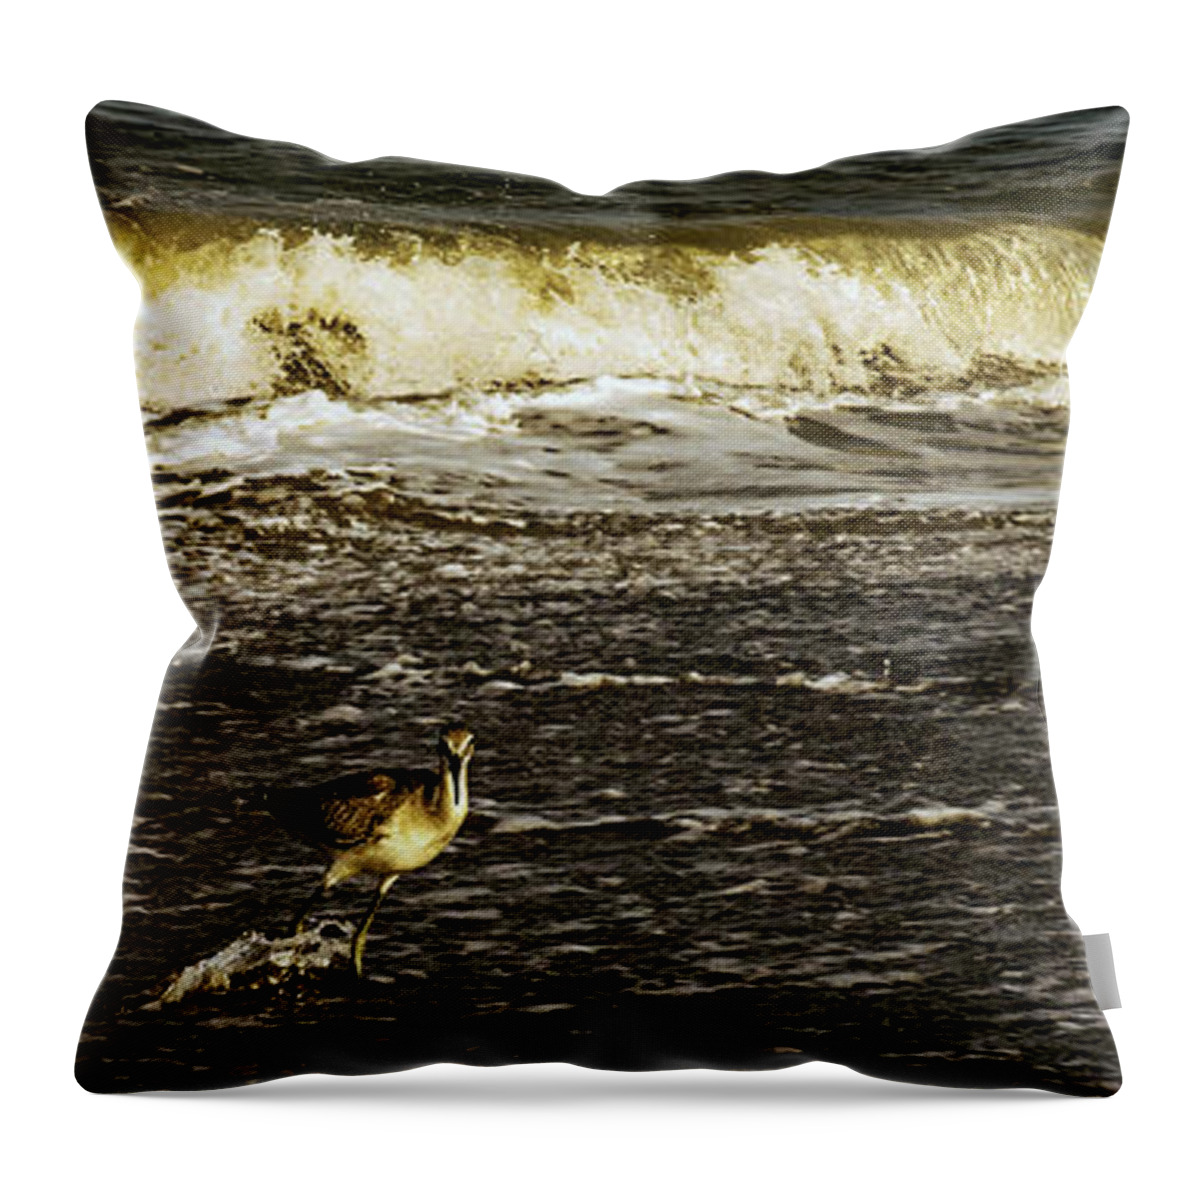 The Wading Willet Prints Throw Pillow featuring the photograph The Wading Willet by John Harding